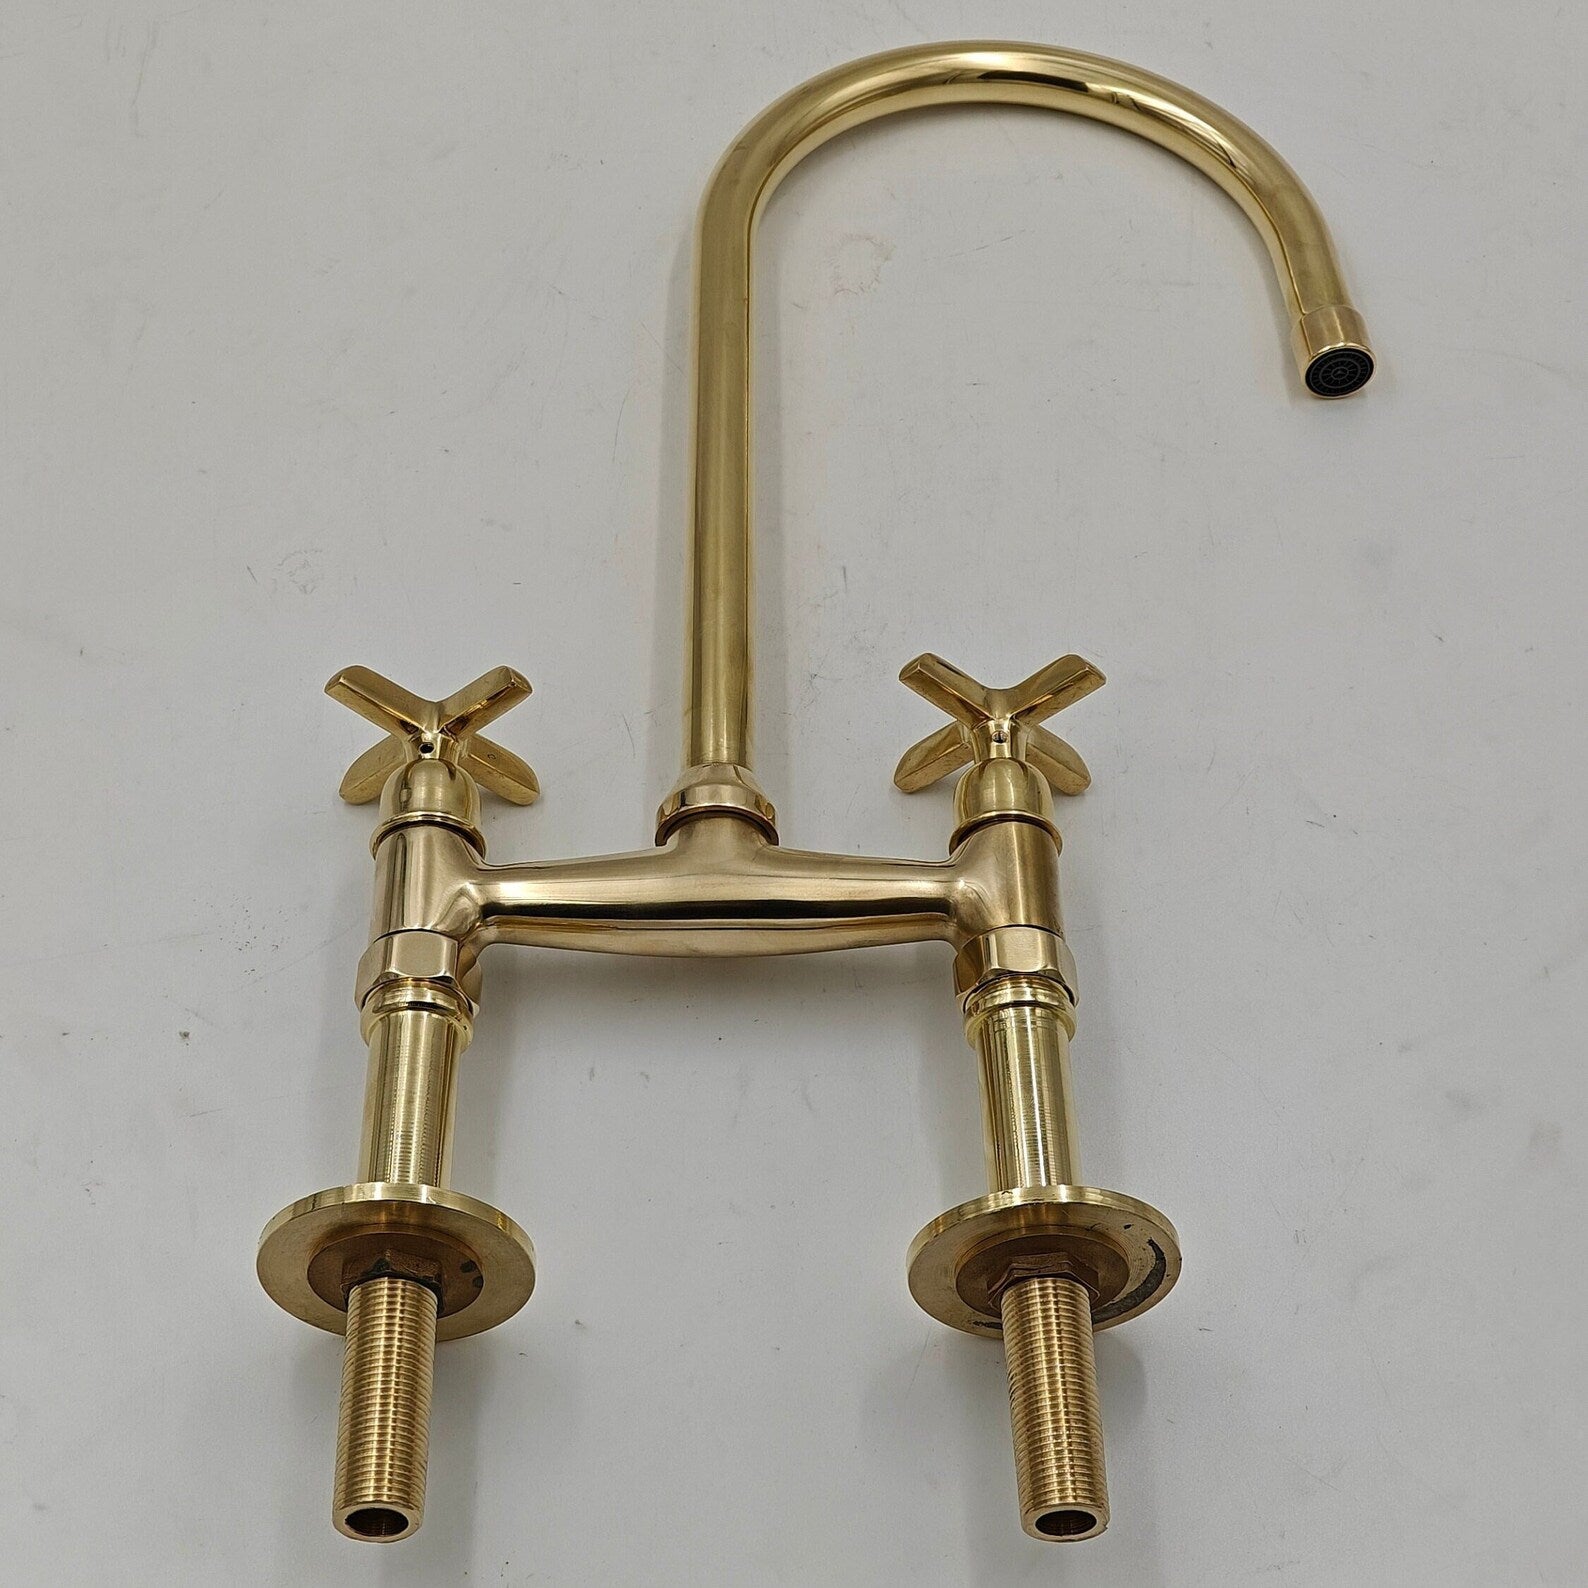 Solid Brass Kitchen Sink Faucet - Vintage Kitchen Faucet In Unlacquered Brass